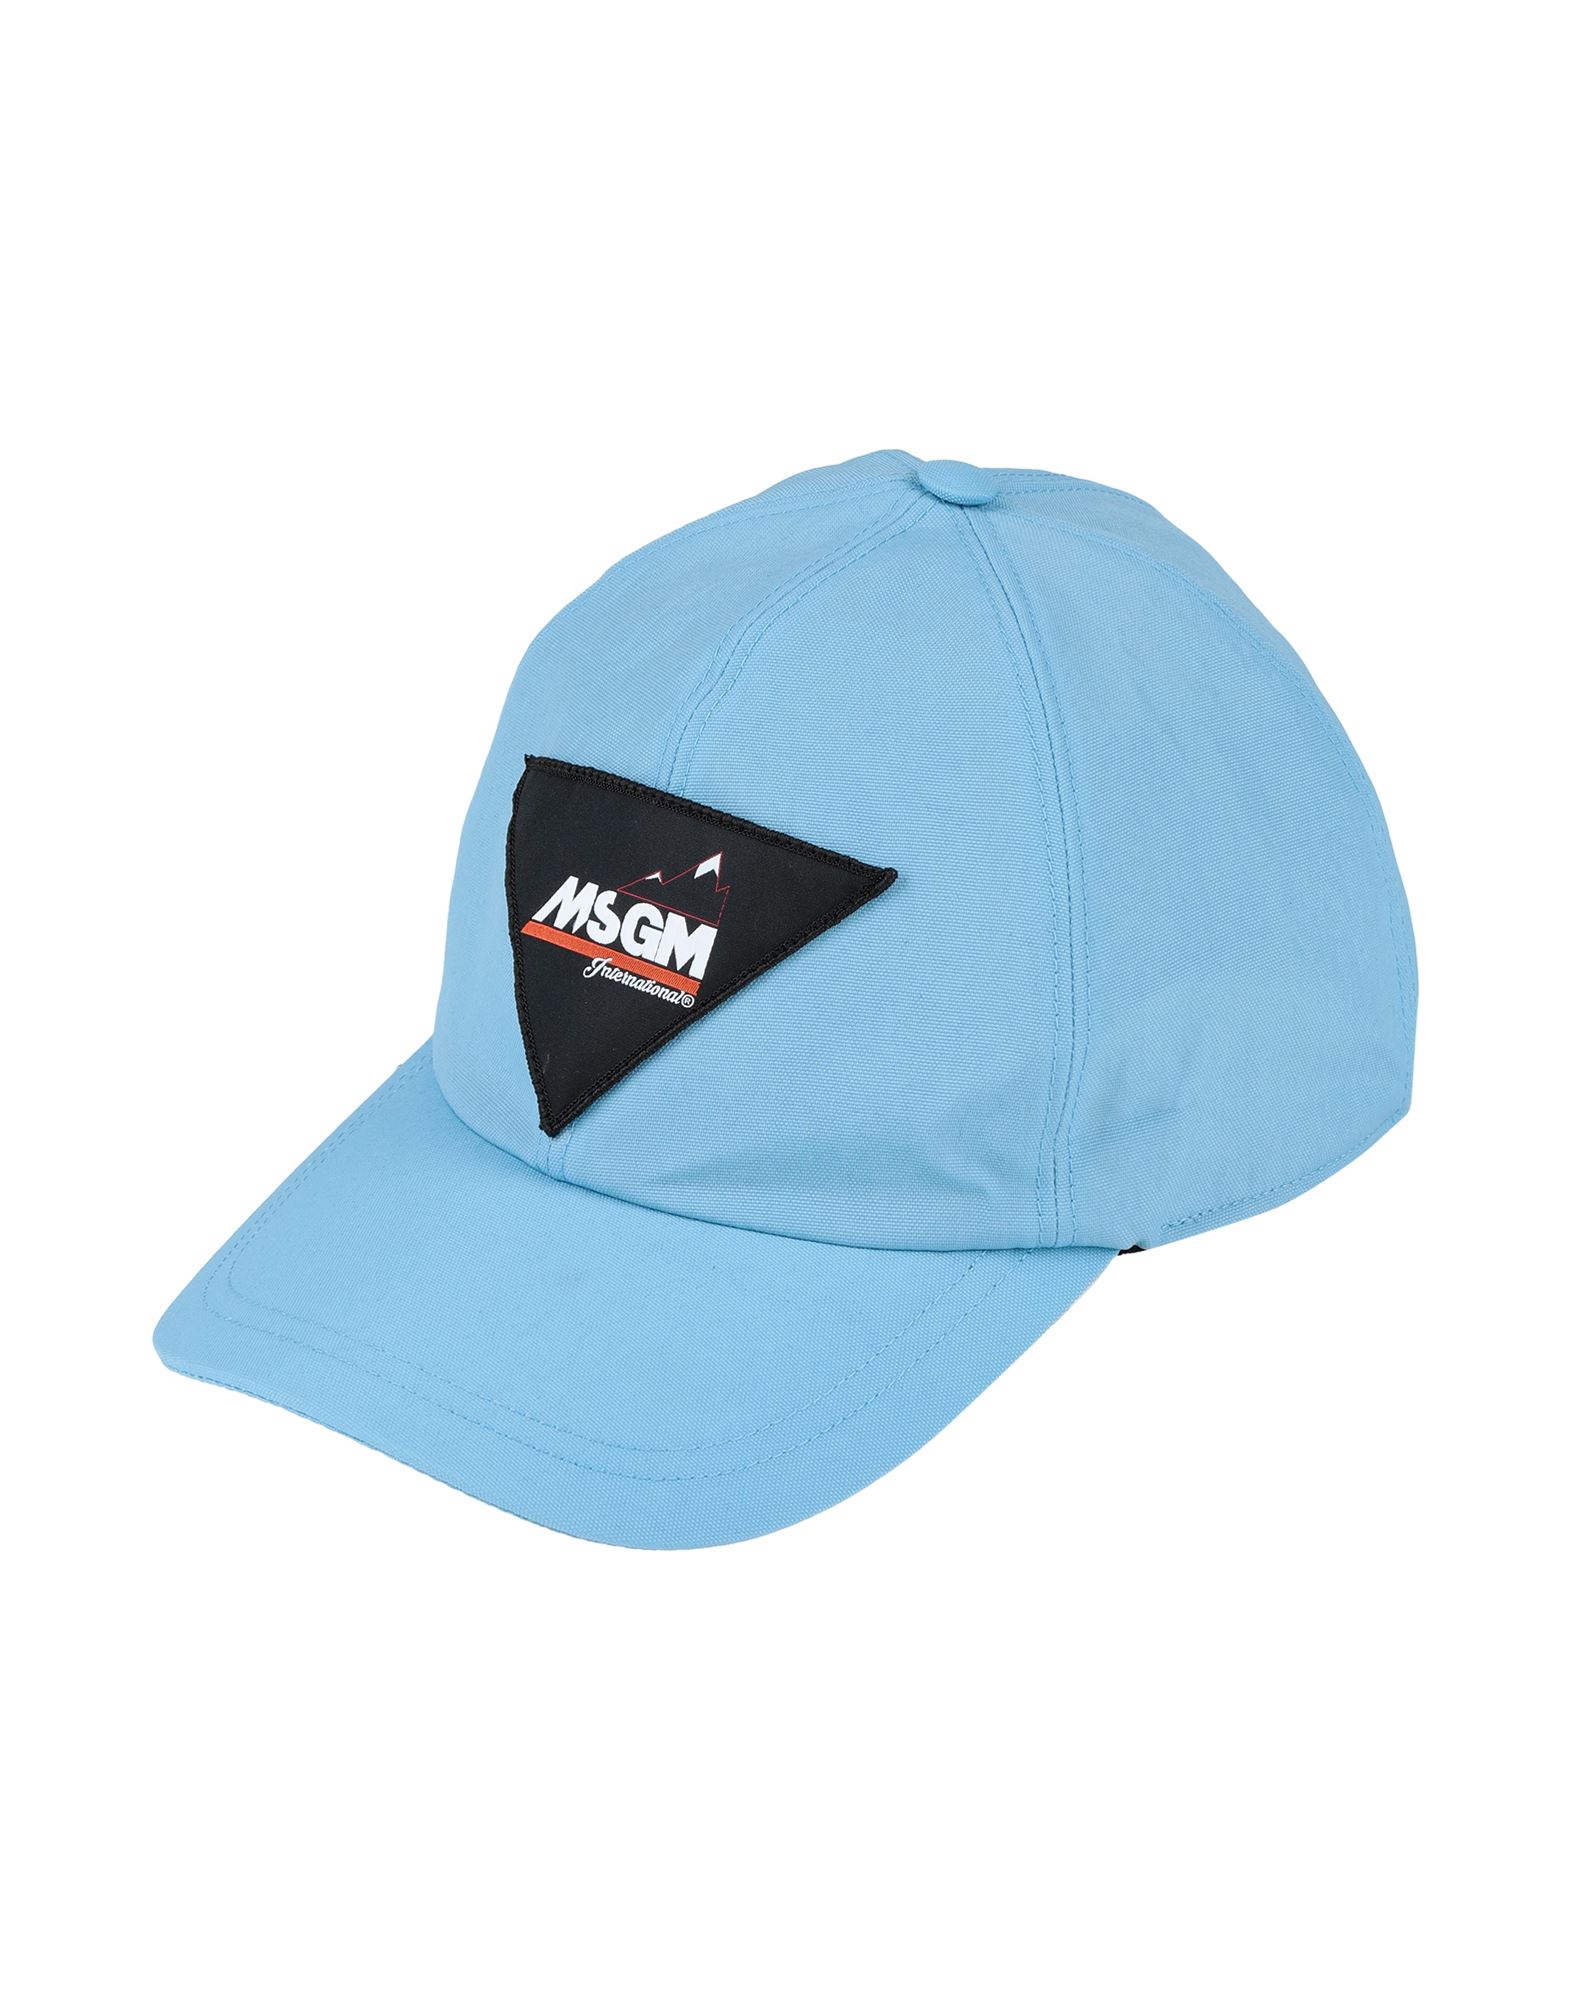 Msgm Hats In Sky Blue